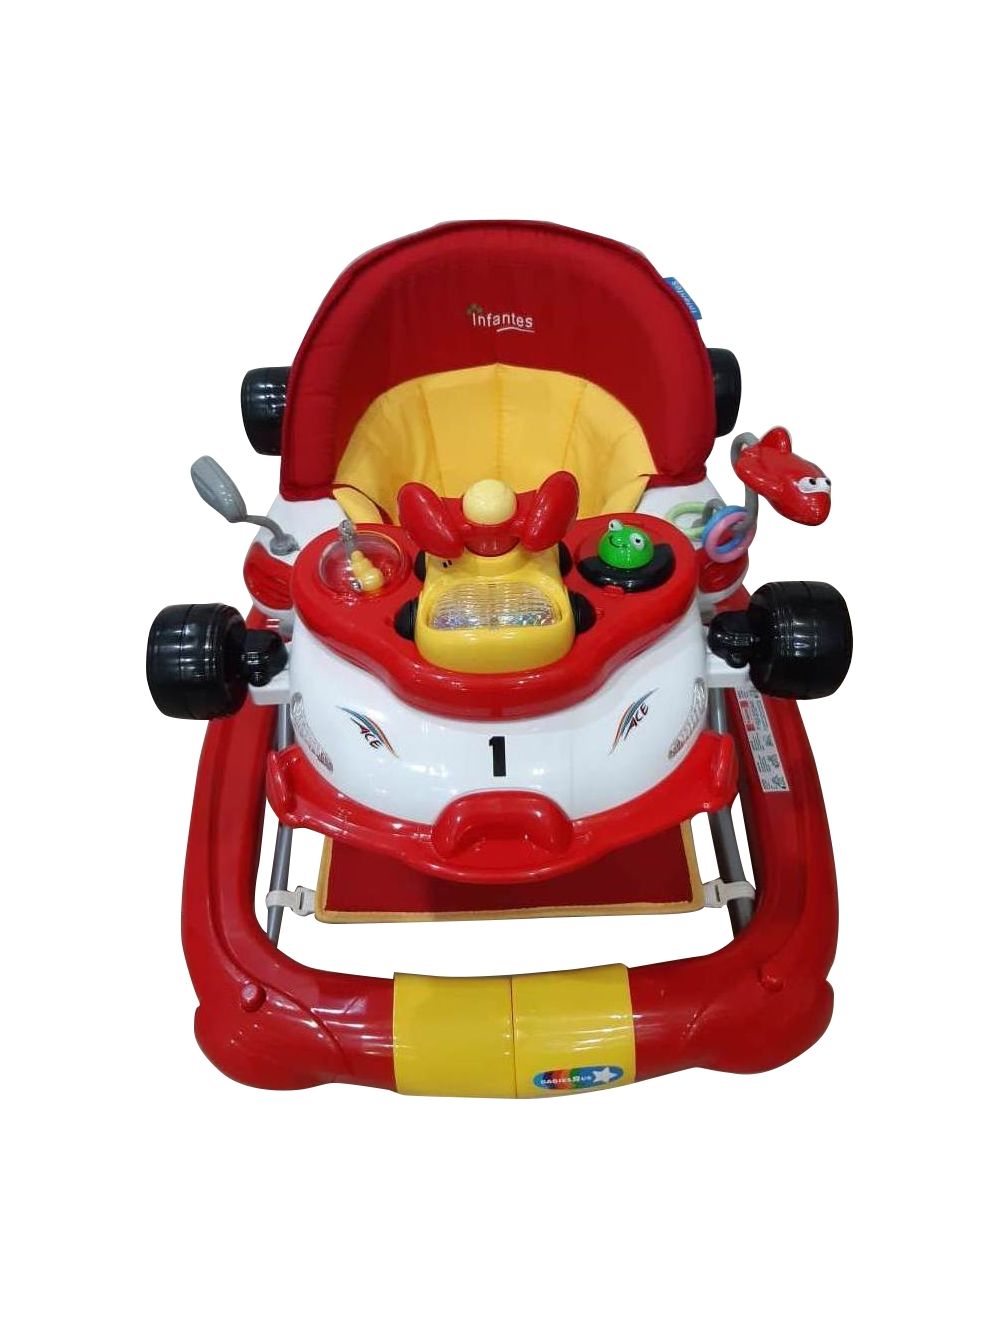 Infantes Baby Walker Red & White